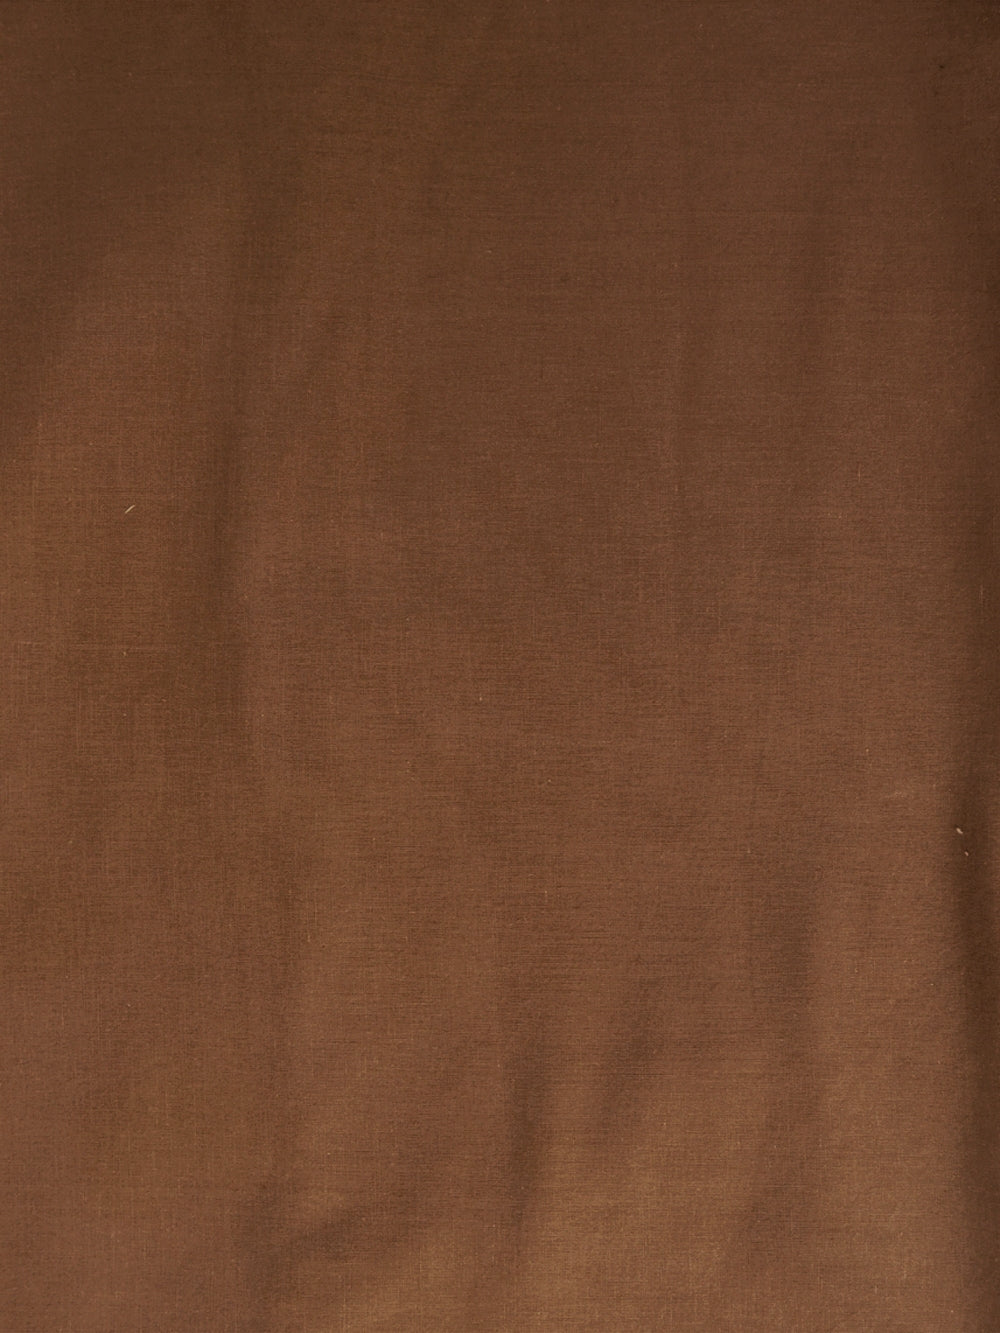 C-52 Brown Shade Solid Dyed Cotton Cambric Fabric